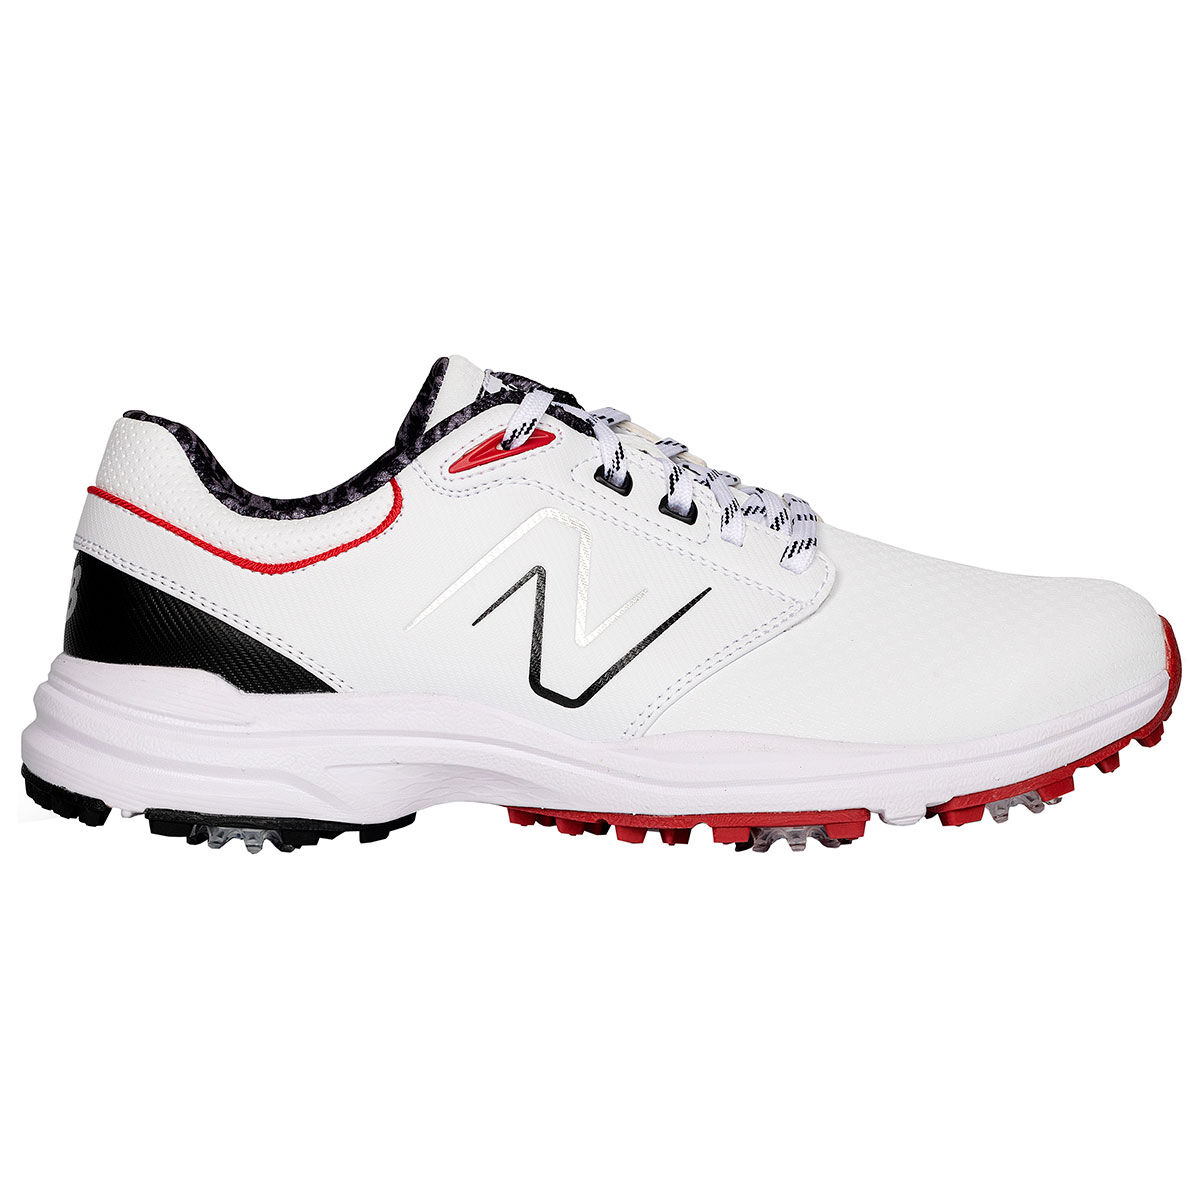 New Balance Men’s Brighton Waterproof Spiked Golf Shoes, Mens, White/red, 9 | American Golf